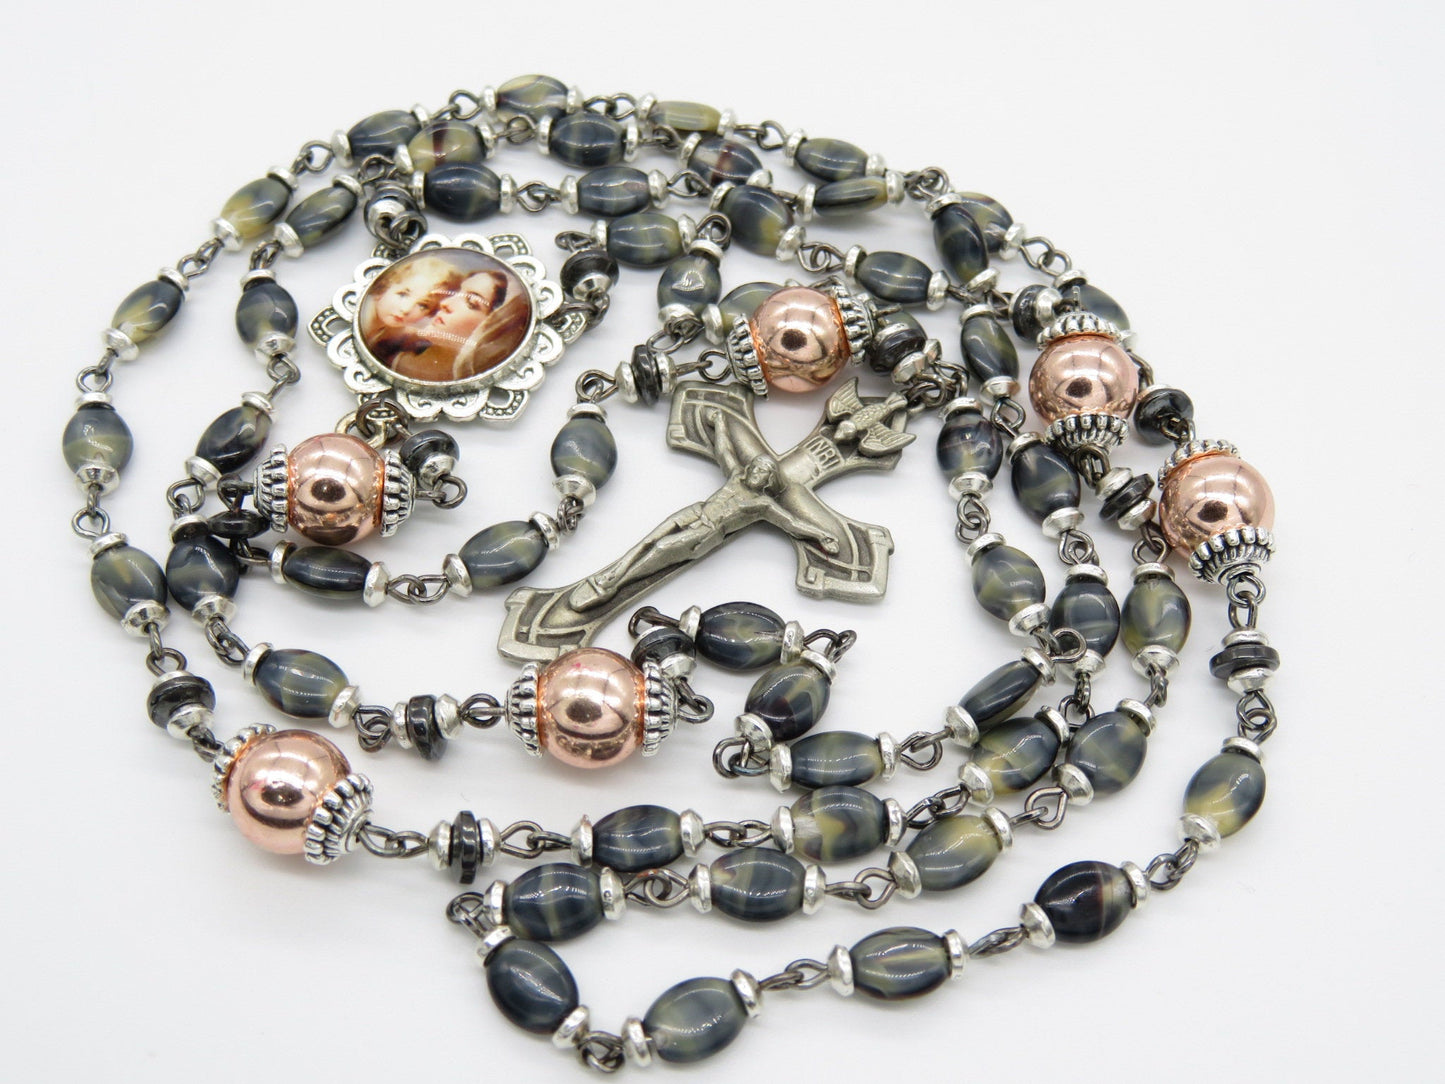 Rose Gold gemstones and glass Rosary beads, Holy Ghost Rosaries, Madonna and child Rosaries, Pewter Holy Spirit Crucifix, religious gift.